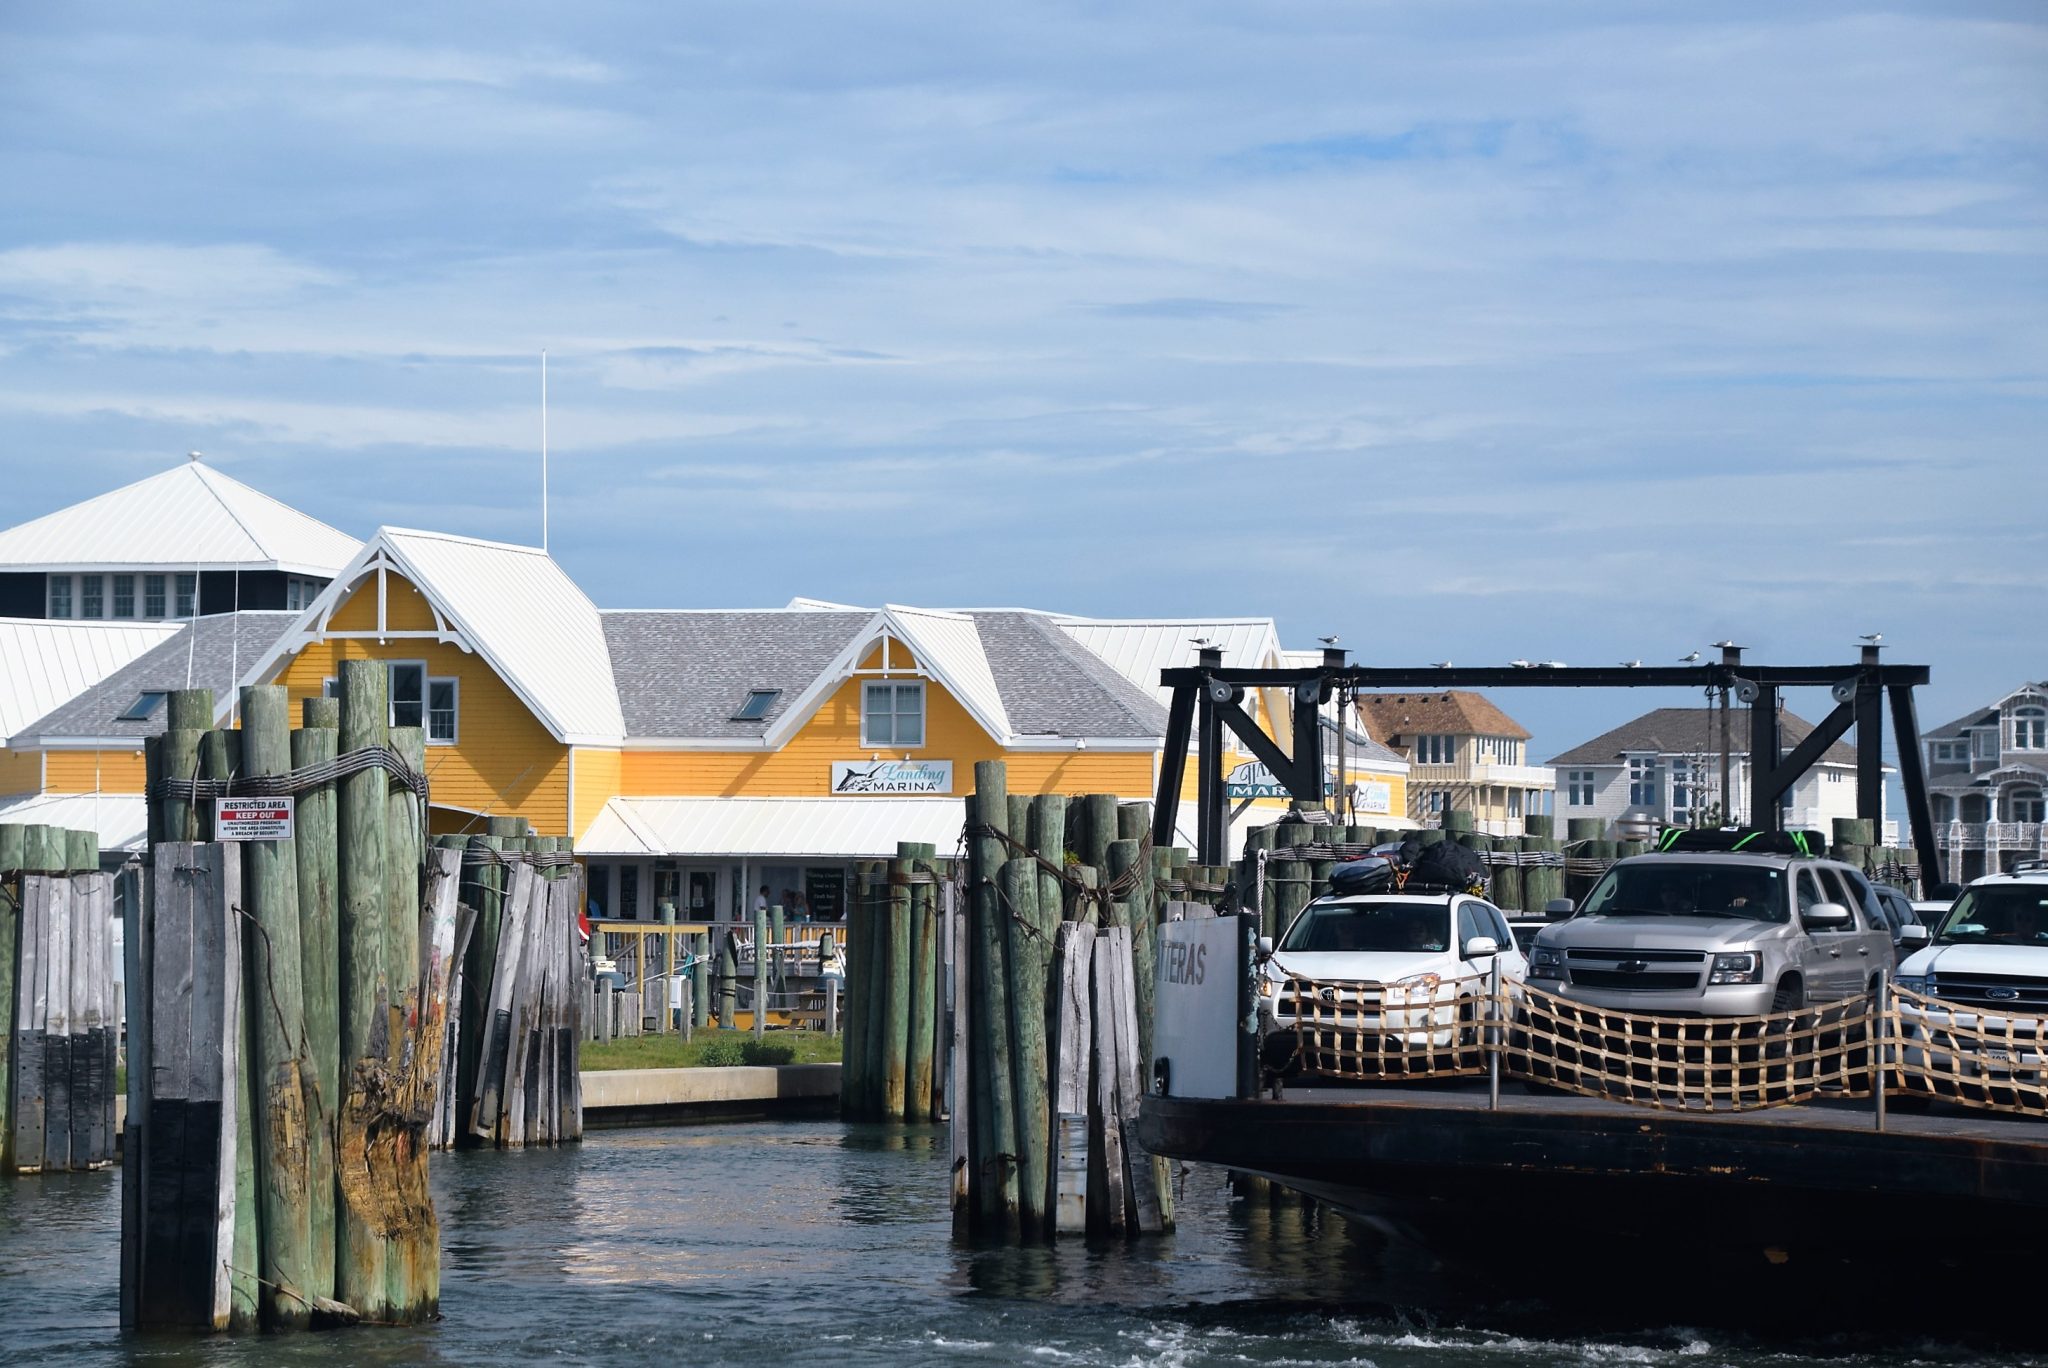 Hatteras-Ocracoke ferry route on reduced schedule | Coastal Review